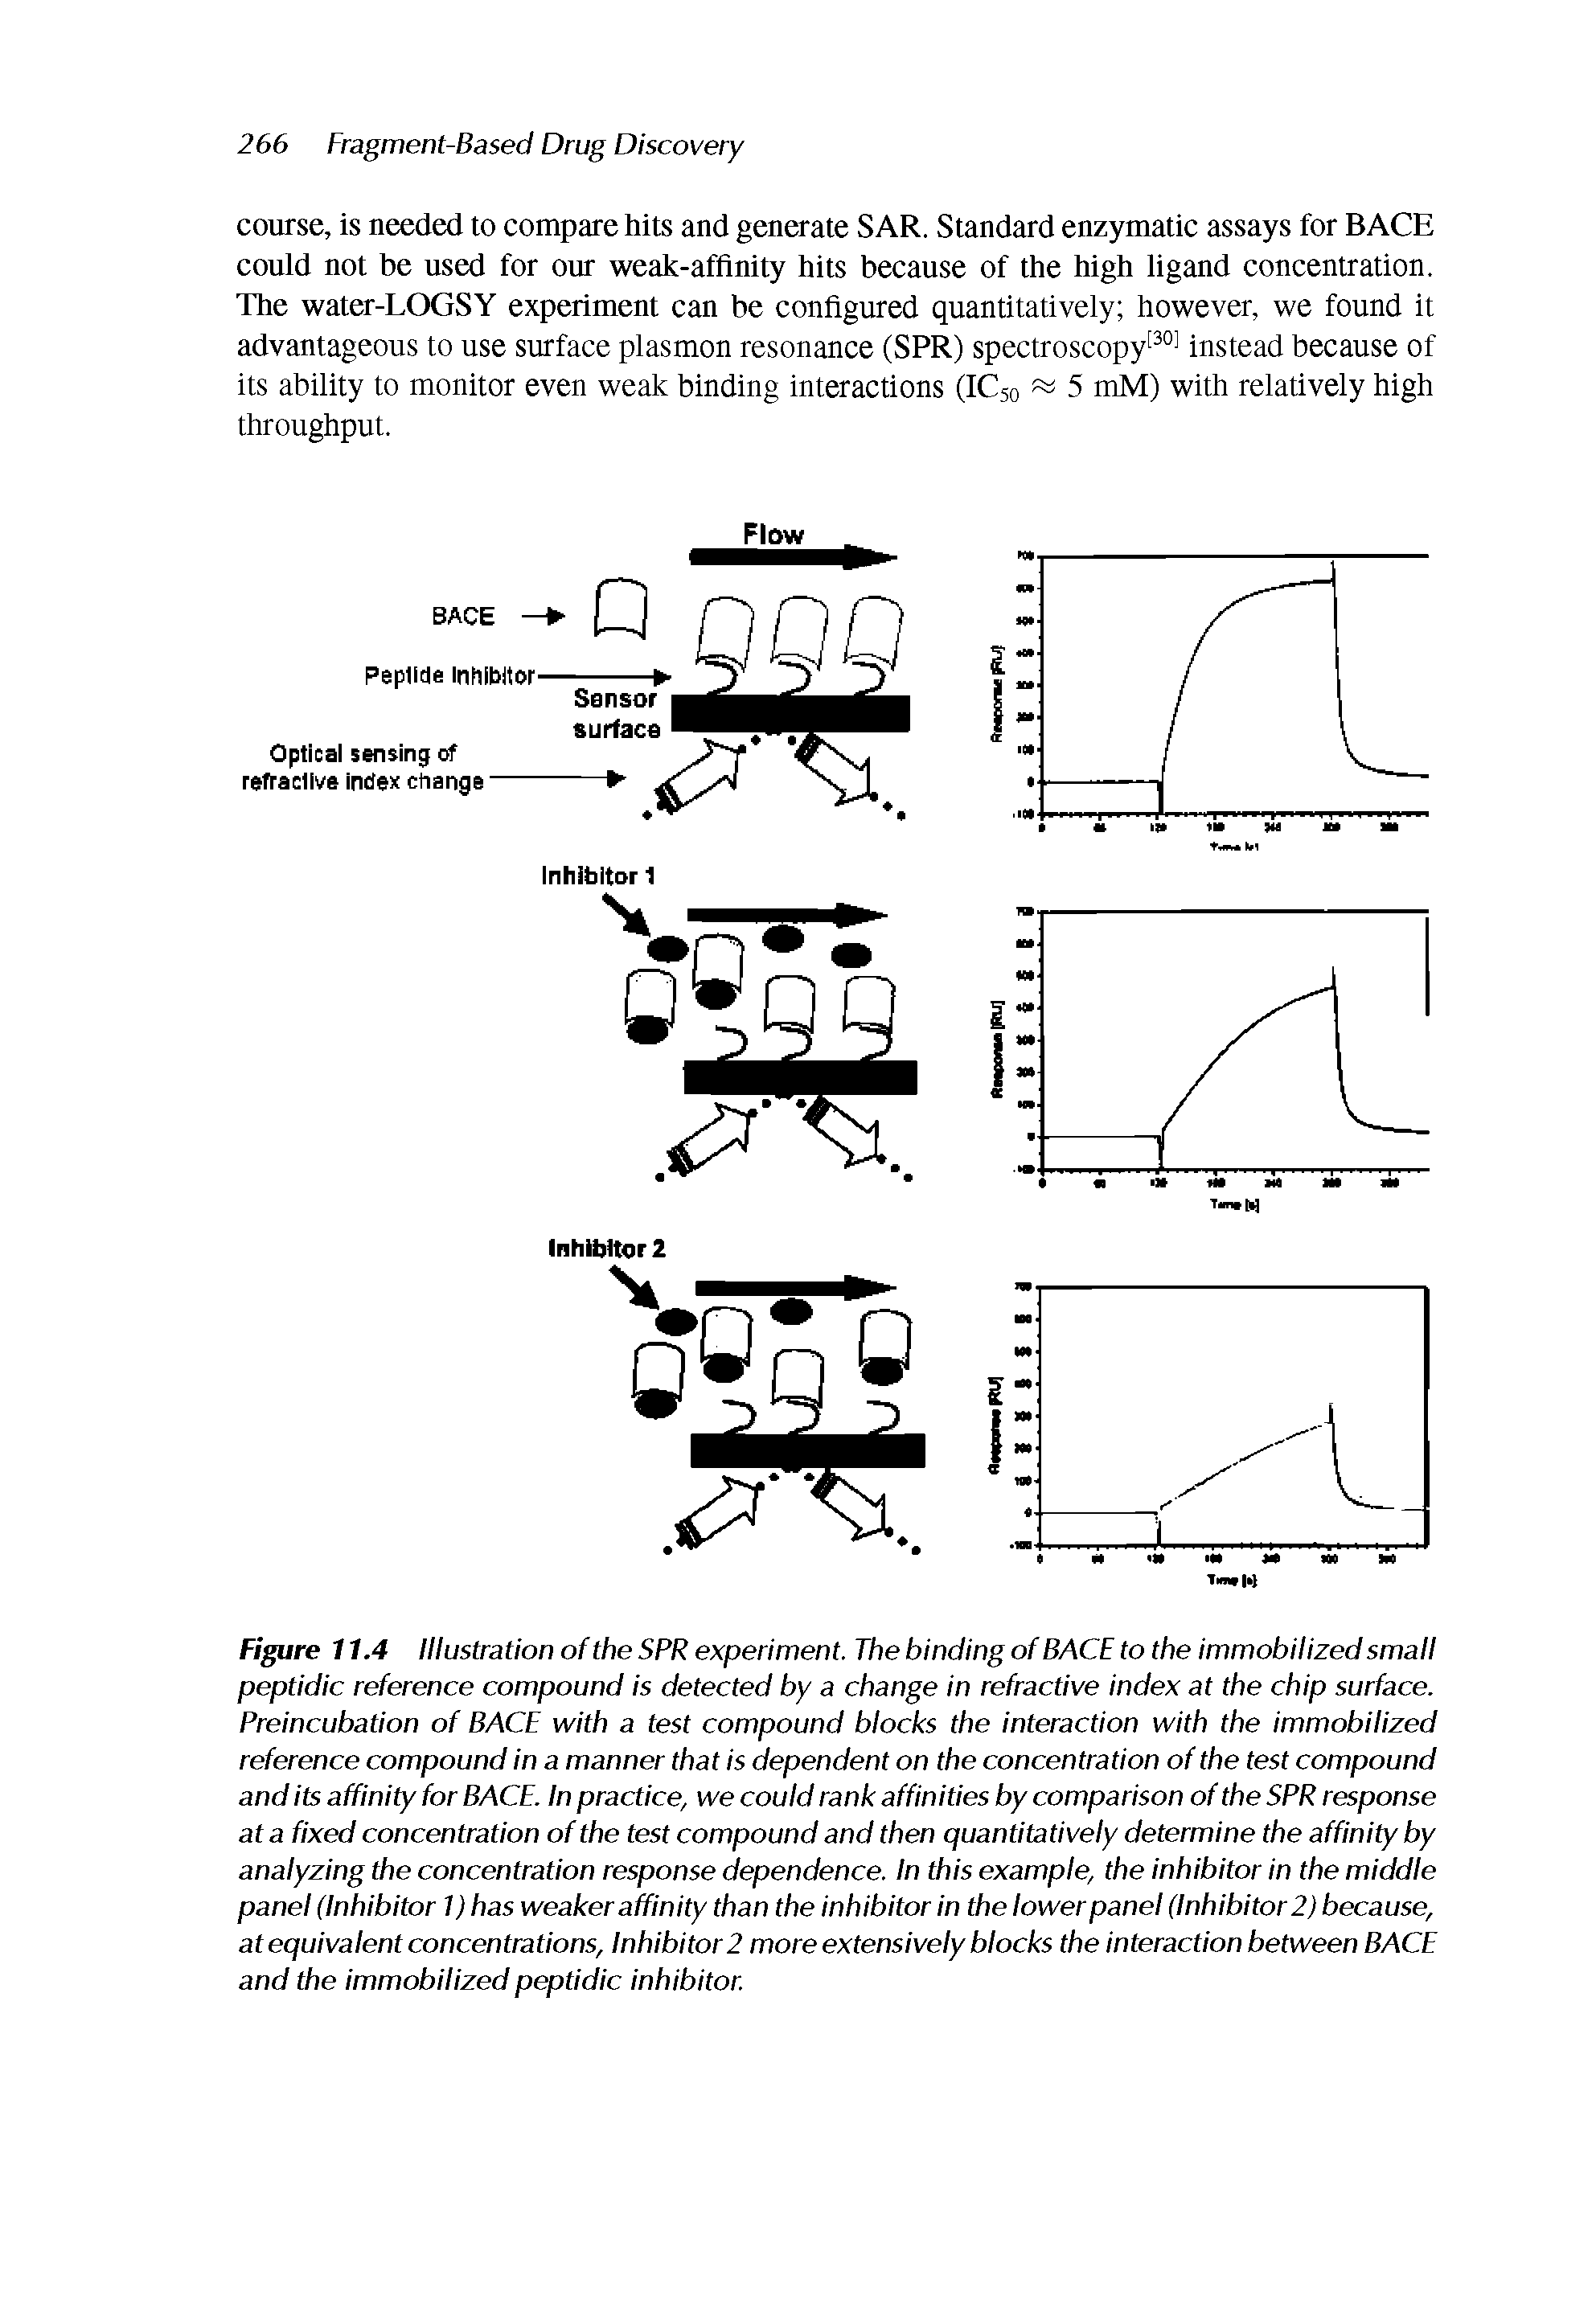 Figure 11.4 Illustration of the SPR experiment. The binding of BACE to the immobilized small peptidic reference compound is detected by a change in refractive index at the chip surface. Preincubation of BACE with a test compound blocks the interaction with the immobilized reference compound in a manner that is dependent on the concentration of the test compound and its affinity for BACE. In practice, we could rank affinities by comparison of the SPR response at a fixed concentration of the test compound and then quantitatively determine the affinity by analyzing the concentration response dependence. In this example, the inhibitor in the middle panel (Inhibitor 1) has weaker affinity than the inhibitor in the lower panel (Inhibitor 2) because, at equivalent concentrations, Inhibitor 2 more extensively blocks the interaction between BACE and the immobilized peptidic inhibitor.